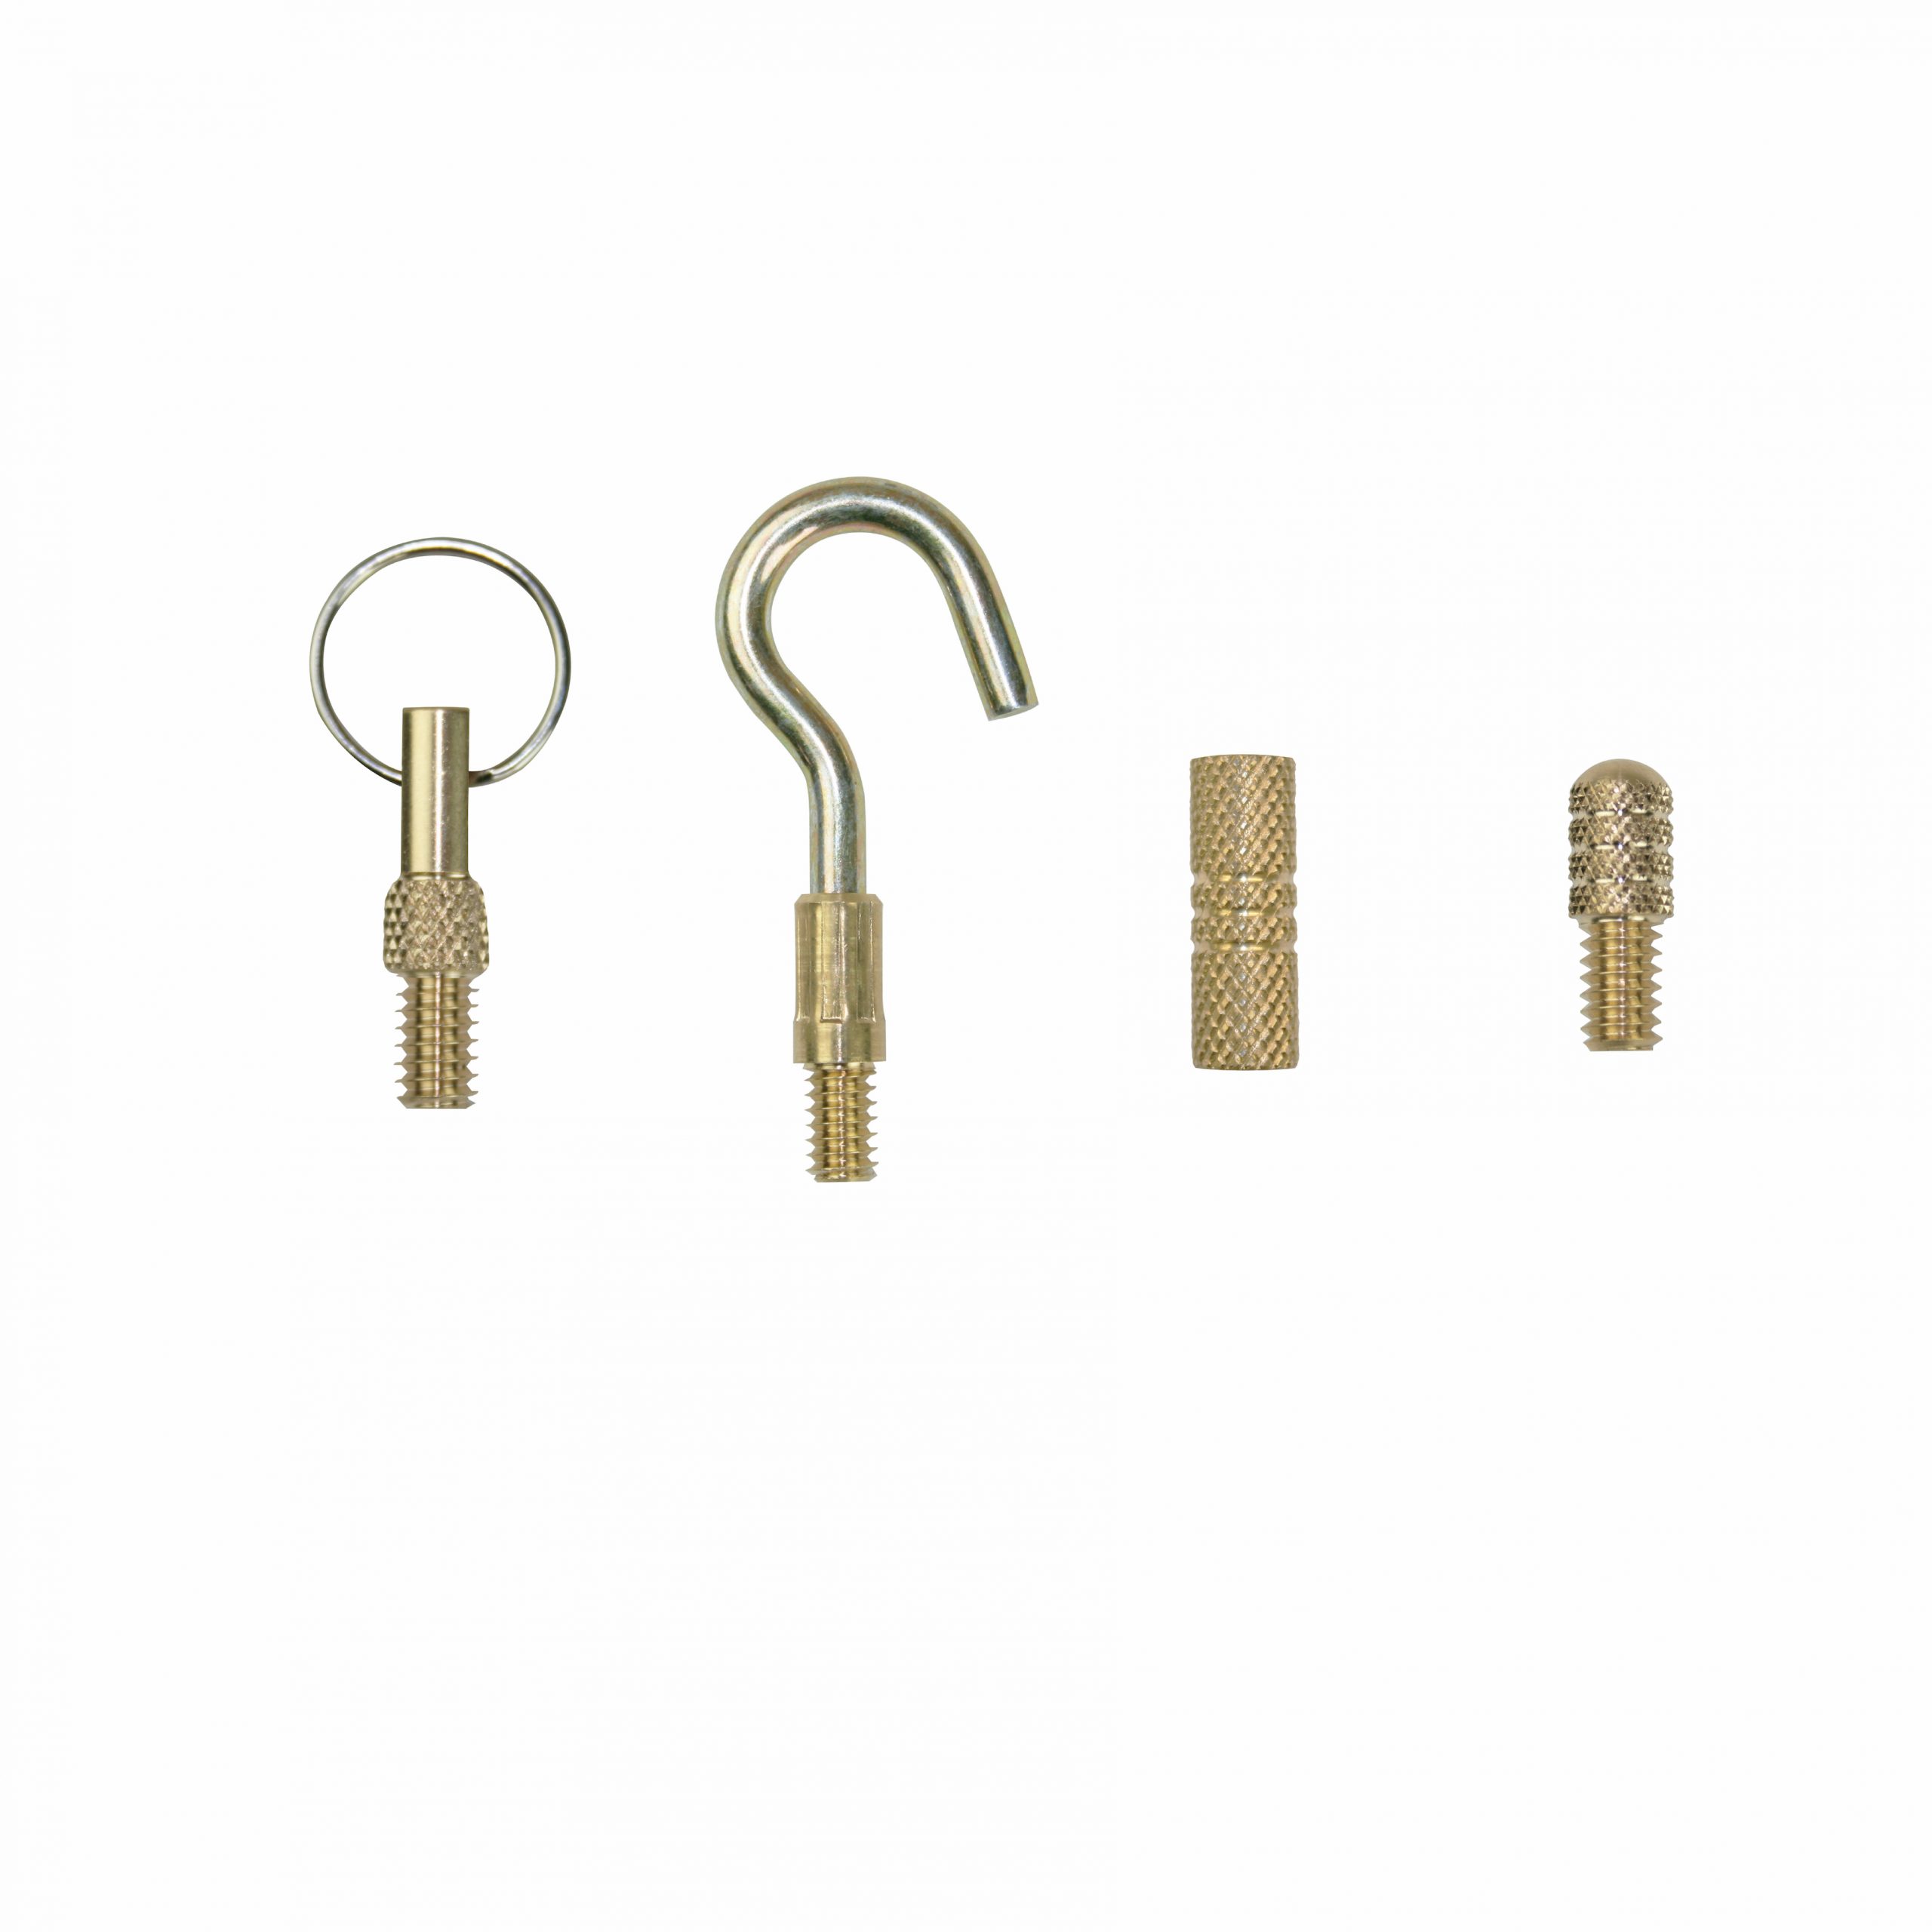 ICONS - PRODUCT PAGES-STANDARD SET BITS TUBE